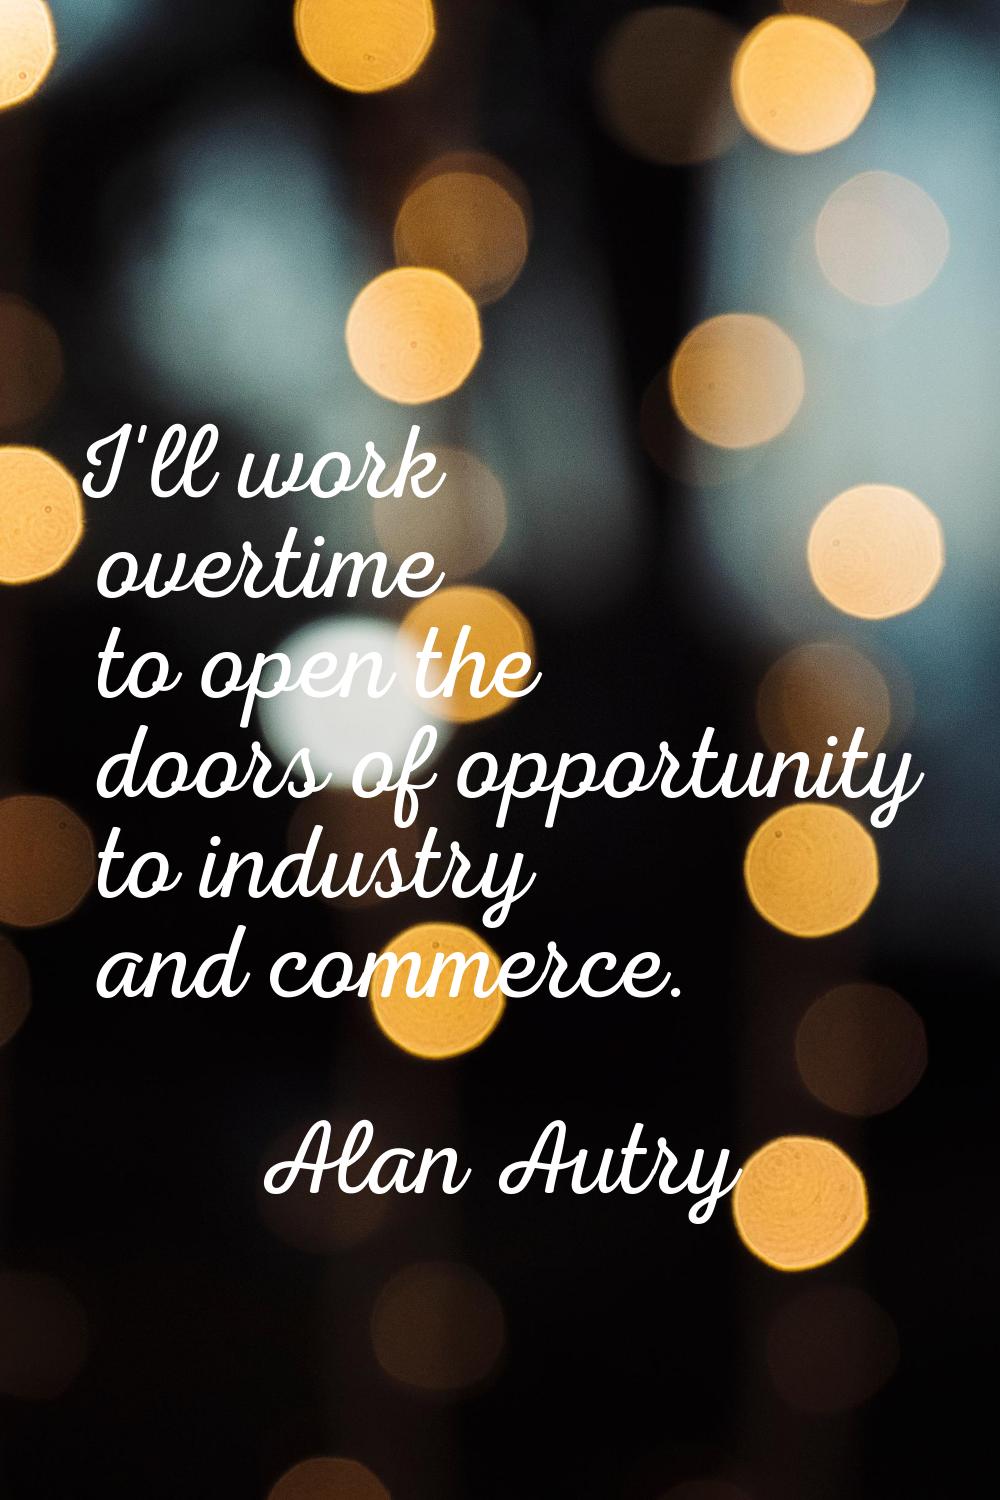 I'll work overtime to open the doors of opportunity to industry and commerce.